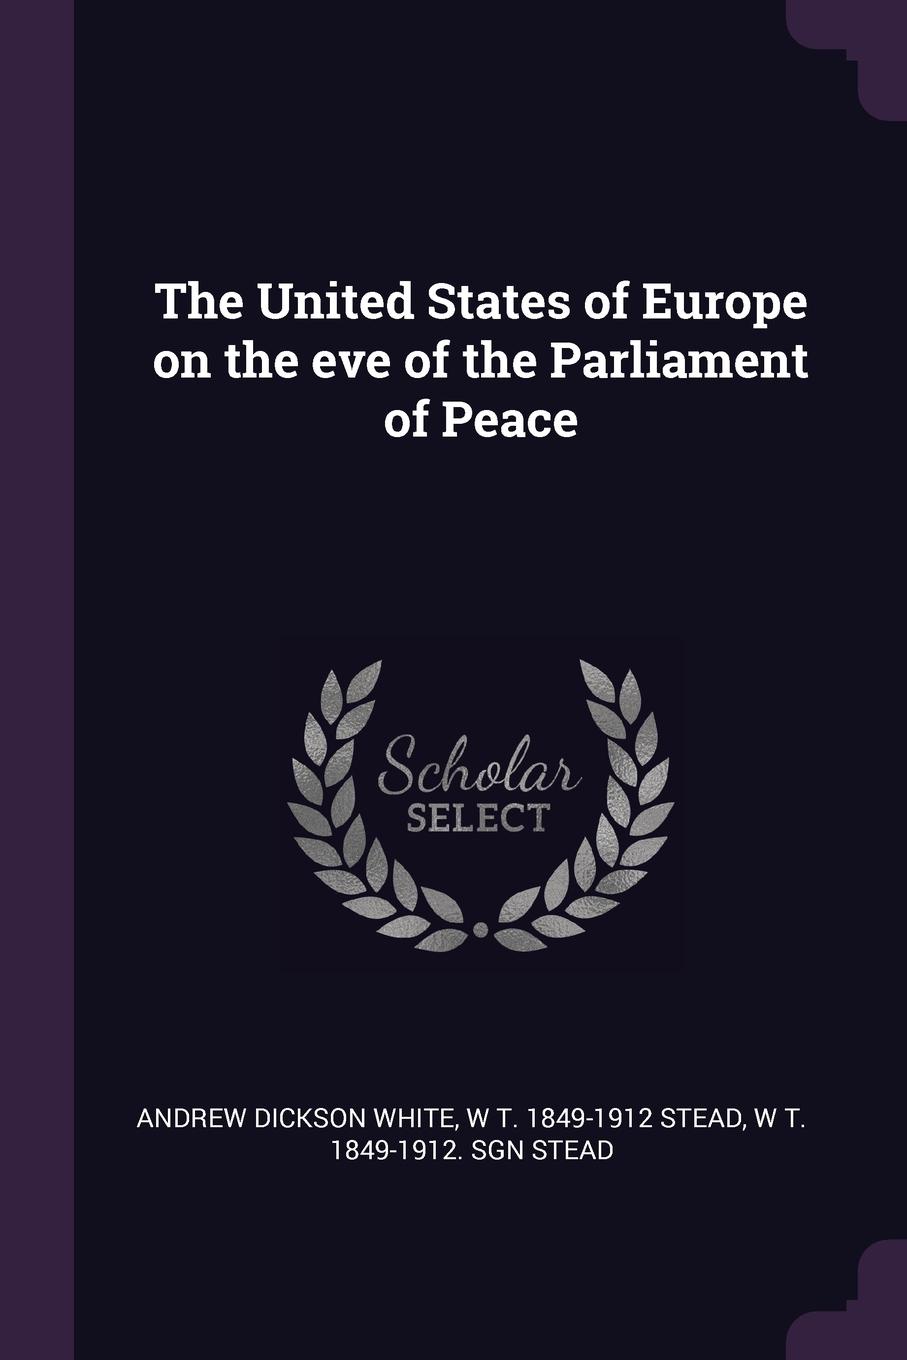 The United States of Europe on the eve of the Parliament of Peace